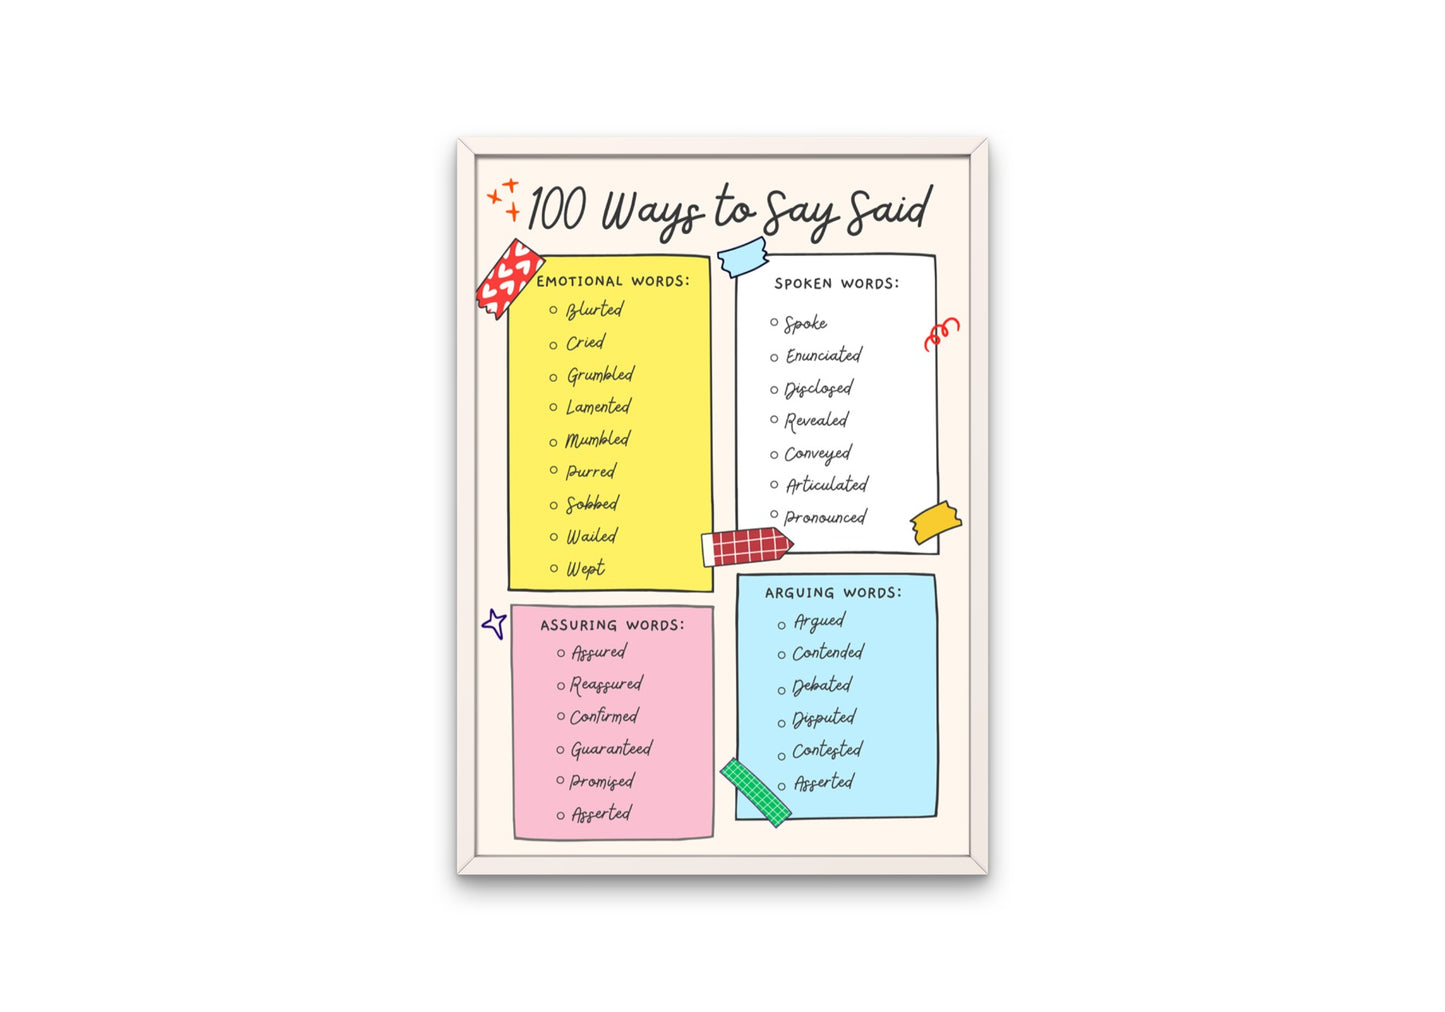 100 Ways to Say 'Said' Posters and Activity Worksheet Bundle | English Poster | | Printable | English Poster | Vocabulary Poster | Spelling Poster | Classroom Decor | Teacher Resource